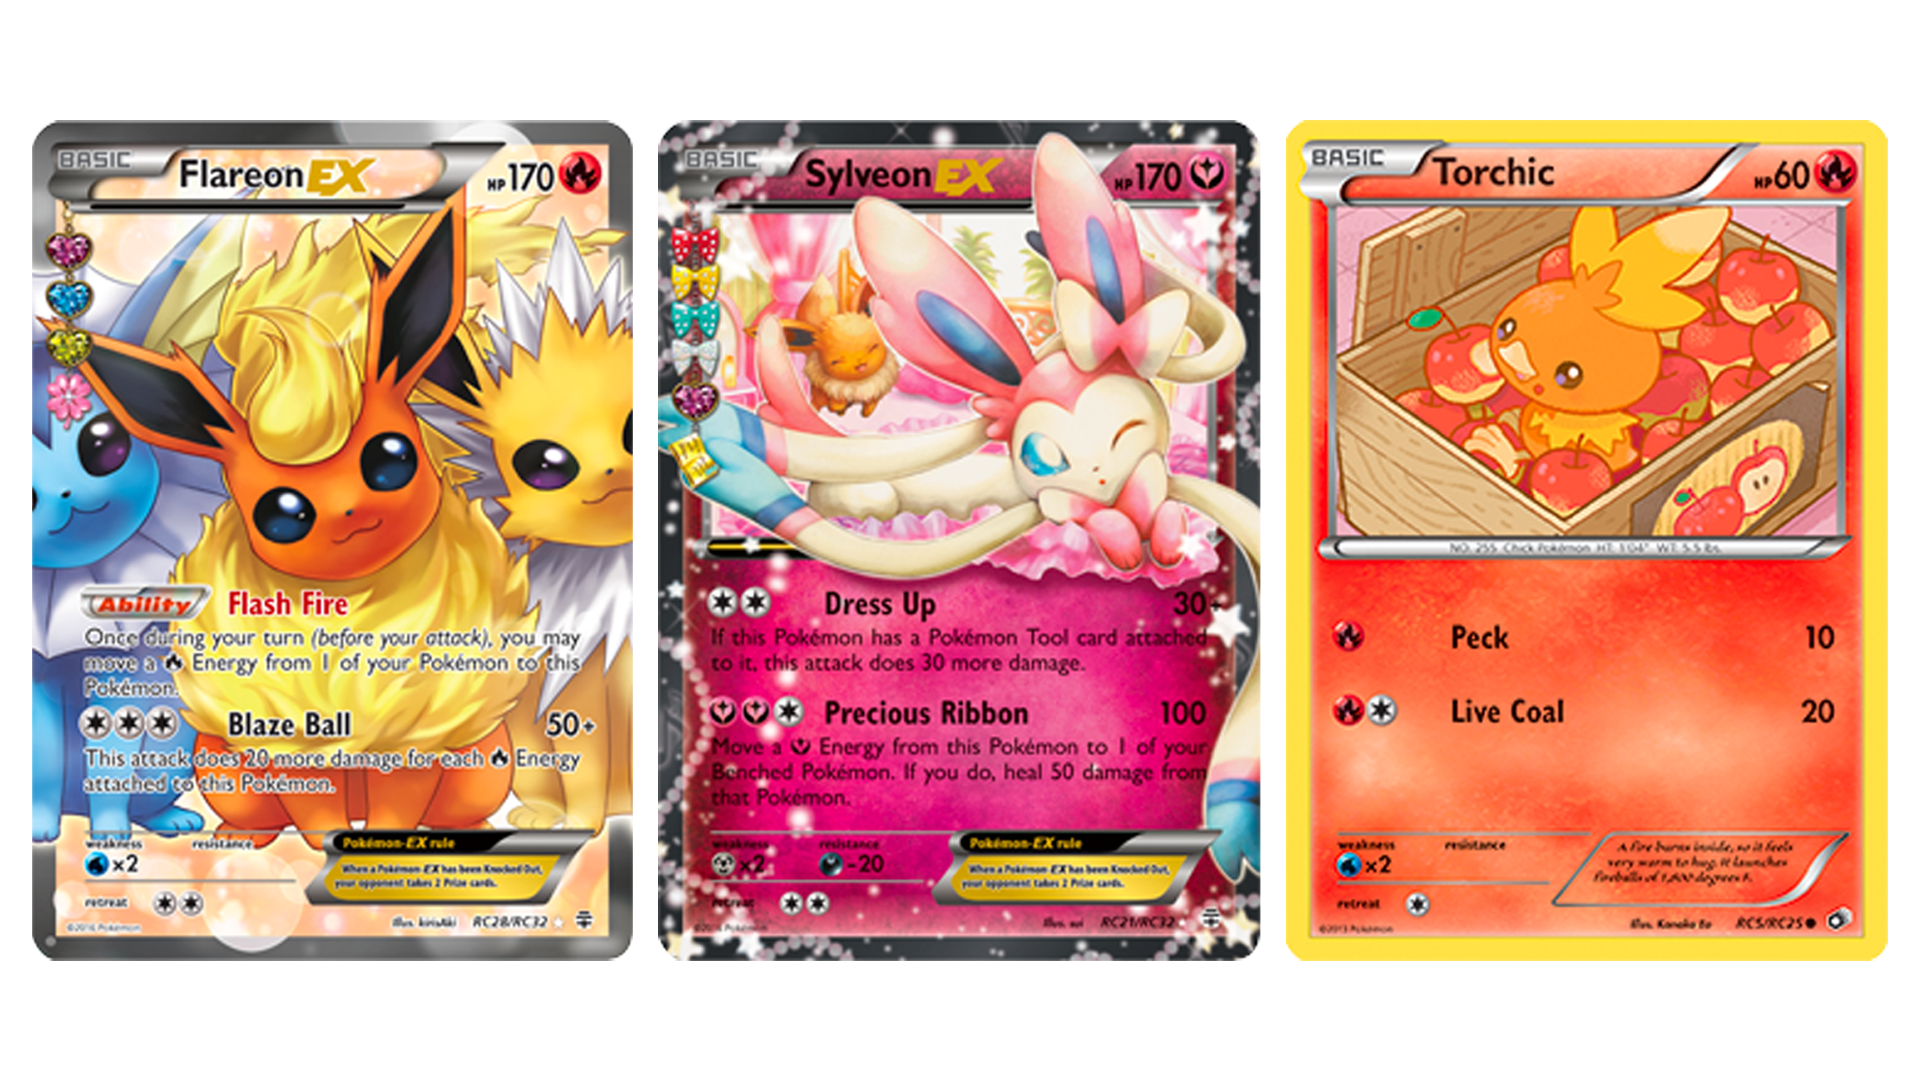 The Pokémon Trading Card Game is a perfect evolution of the video games